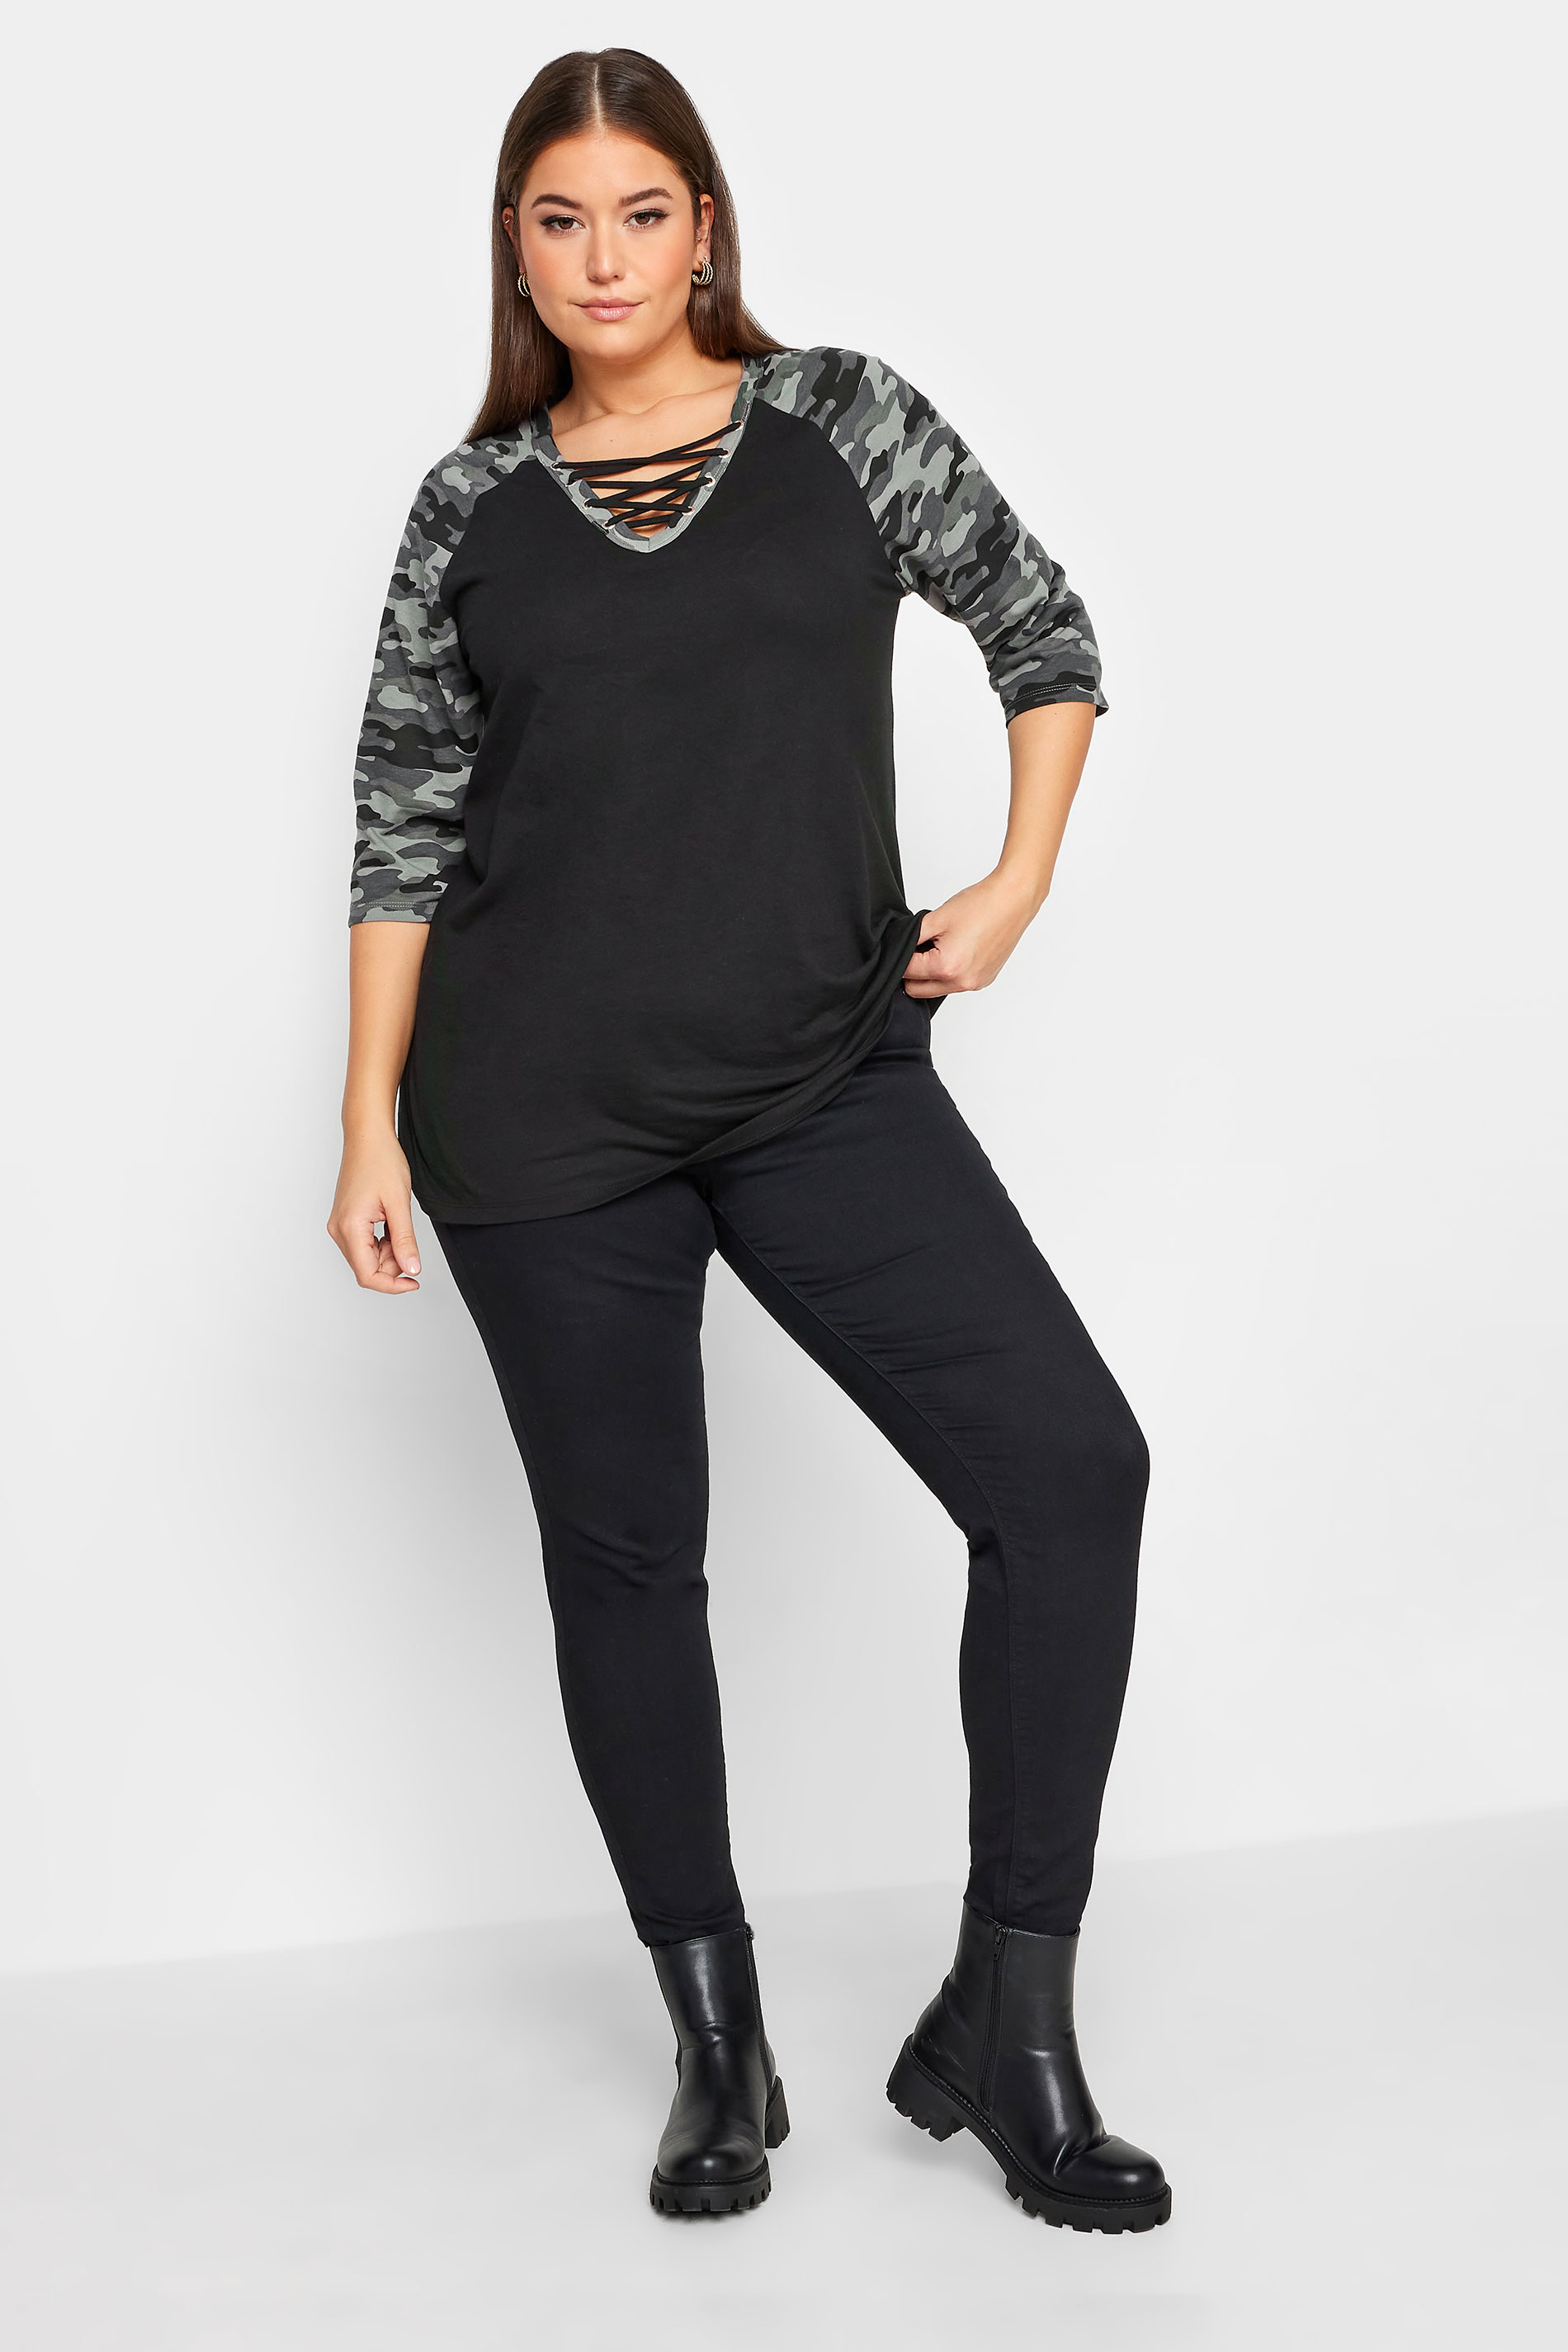 YOURS Plus Size Black Camo Print Lace Up Eyelet Top | Yours Clothing 2